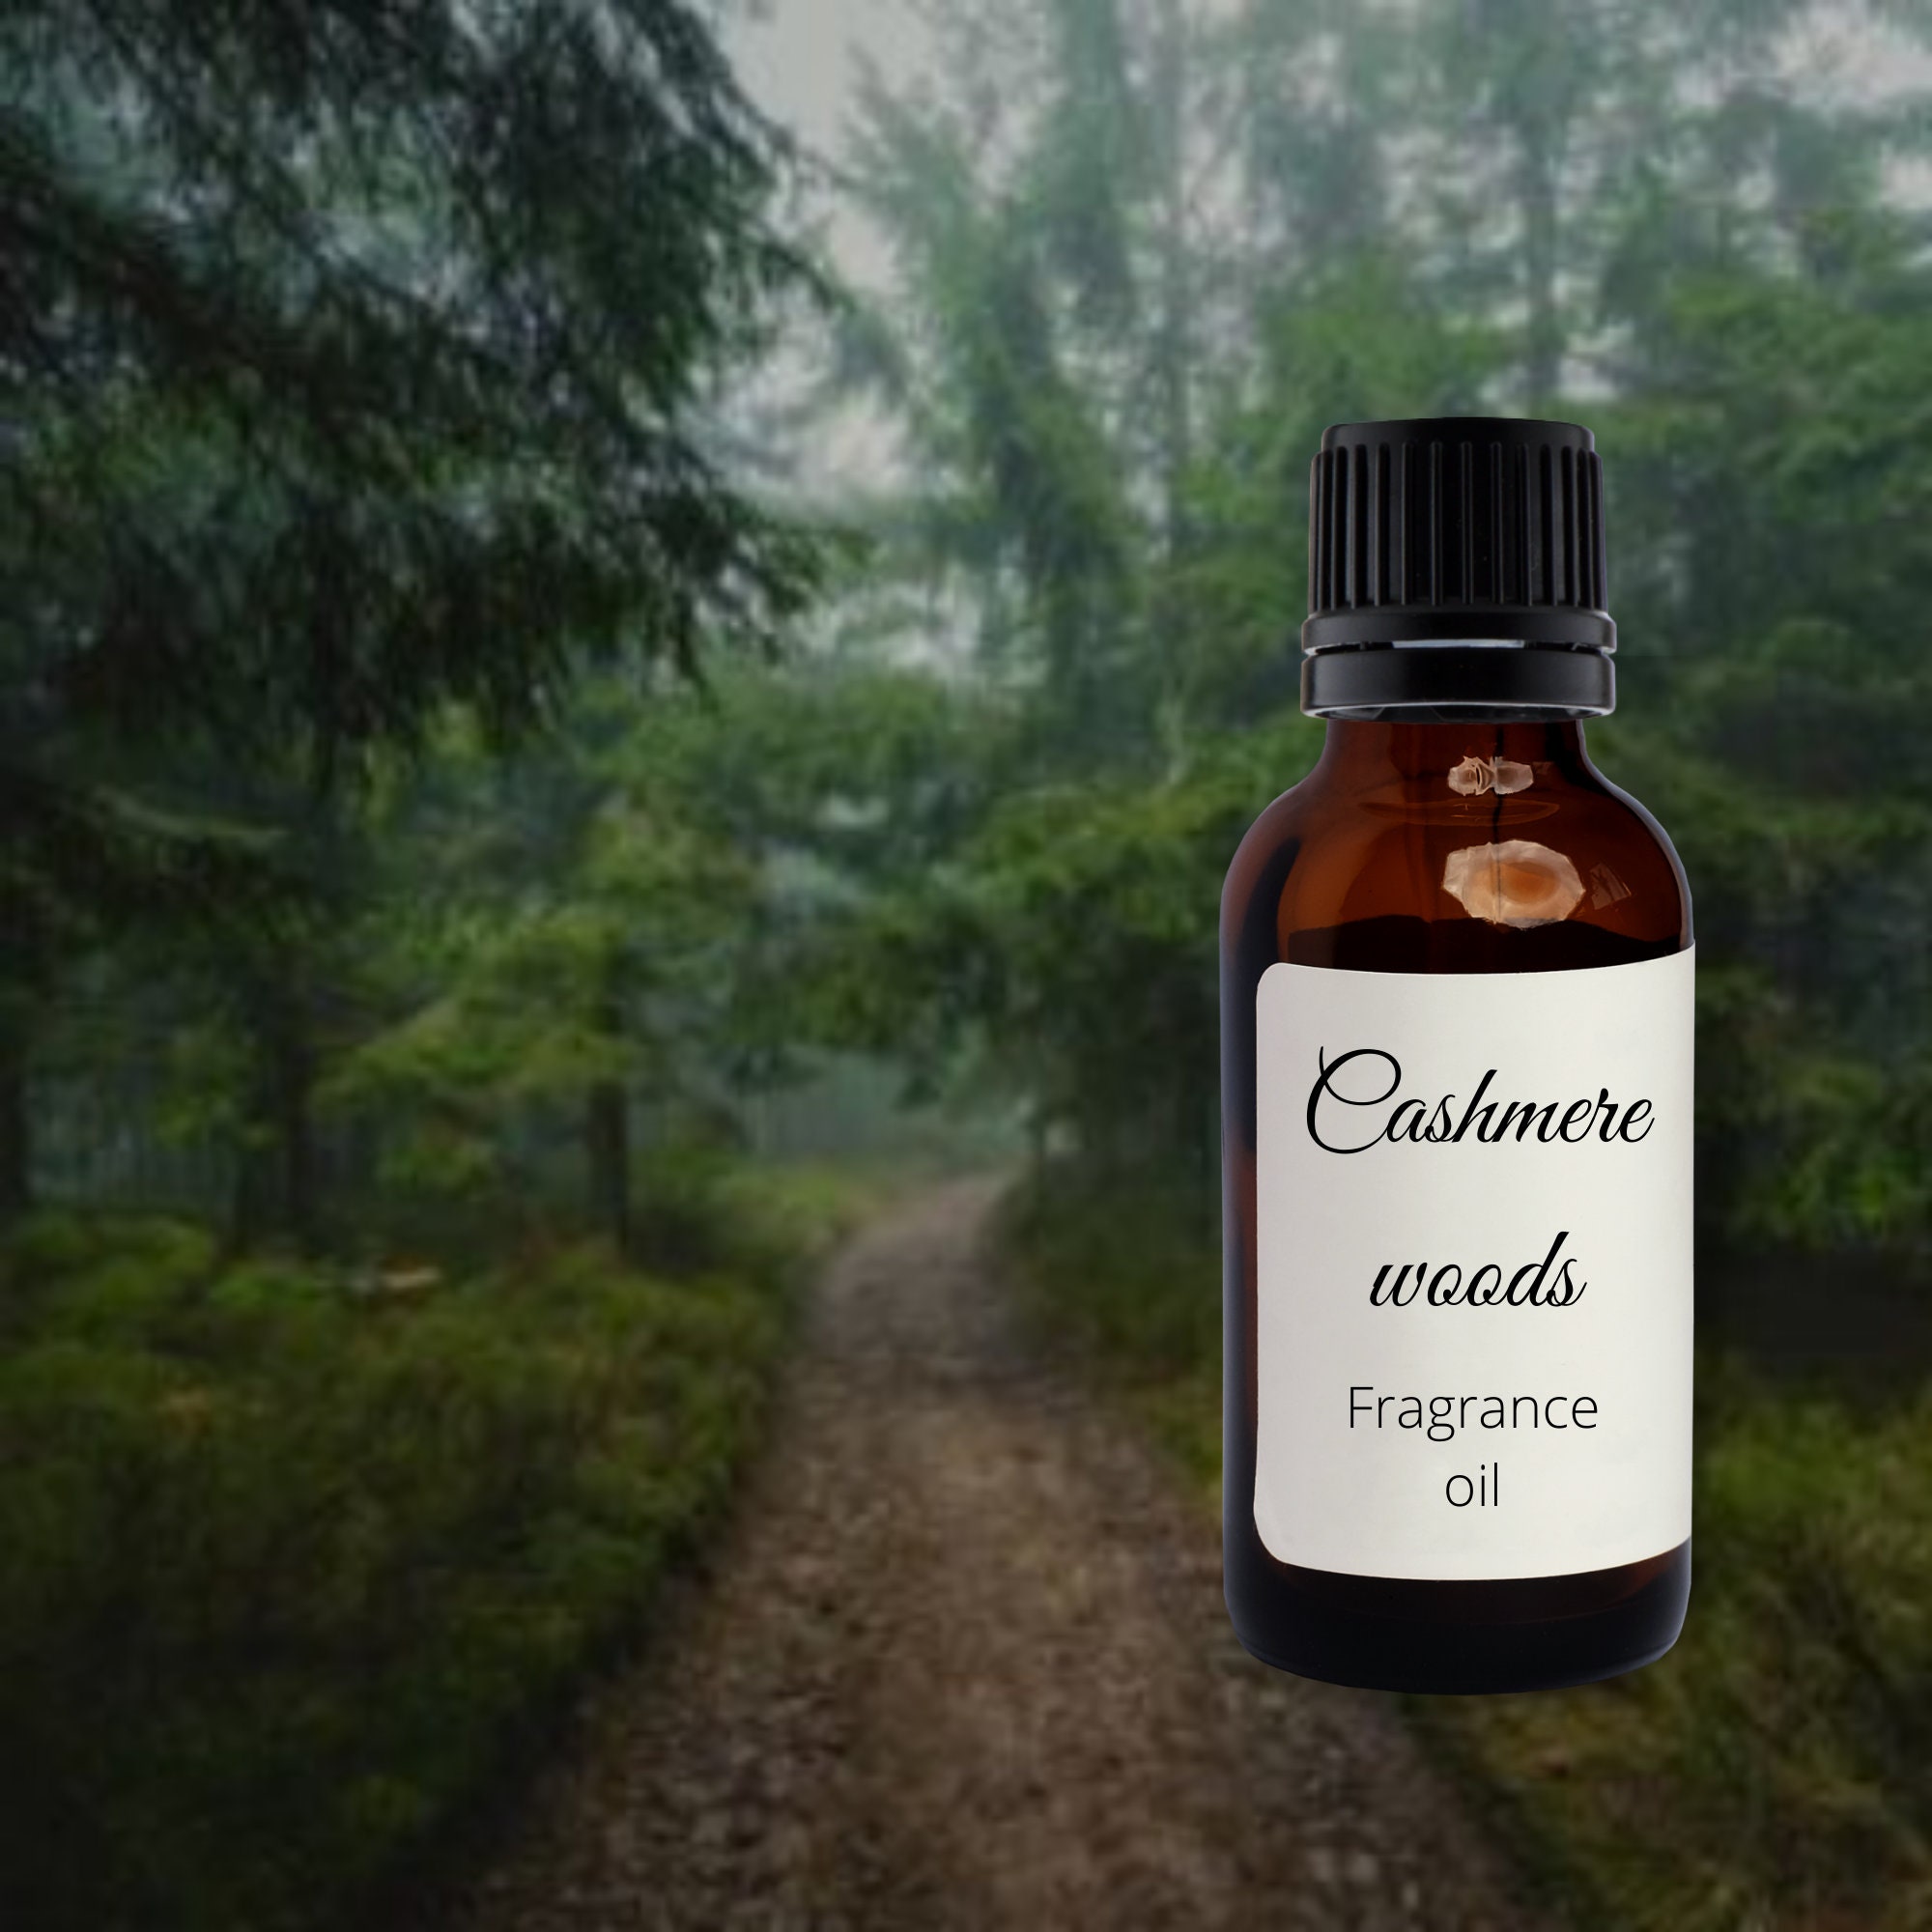 Mystic Moments | Sandalwood Fragrance Oil - 100ml - Perfect for Soaps,  Candles, Bath Bombs, Oil Burners, Diffusers and Skin & Hair Care Items